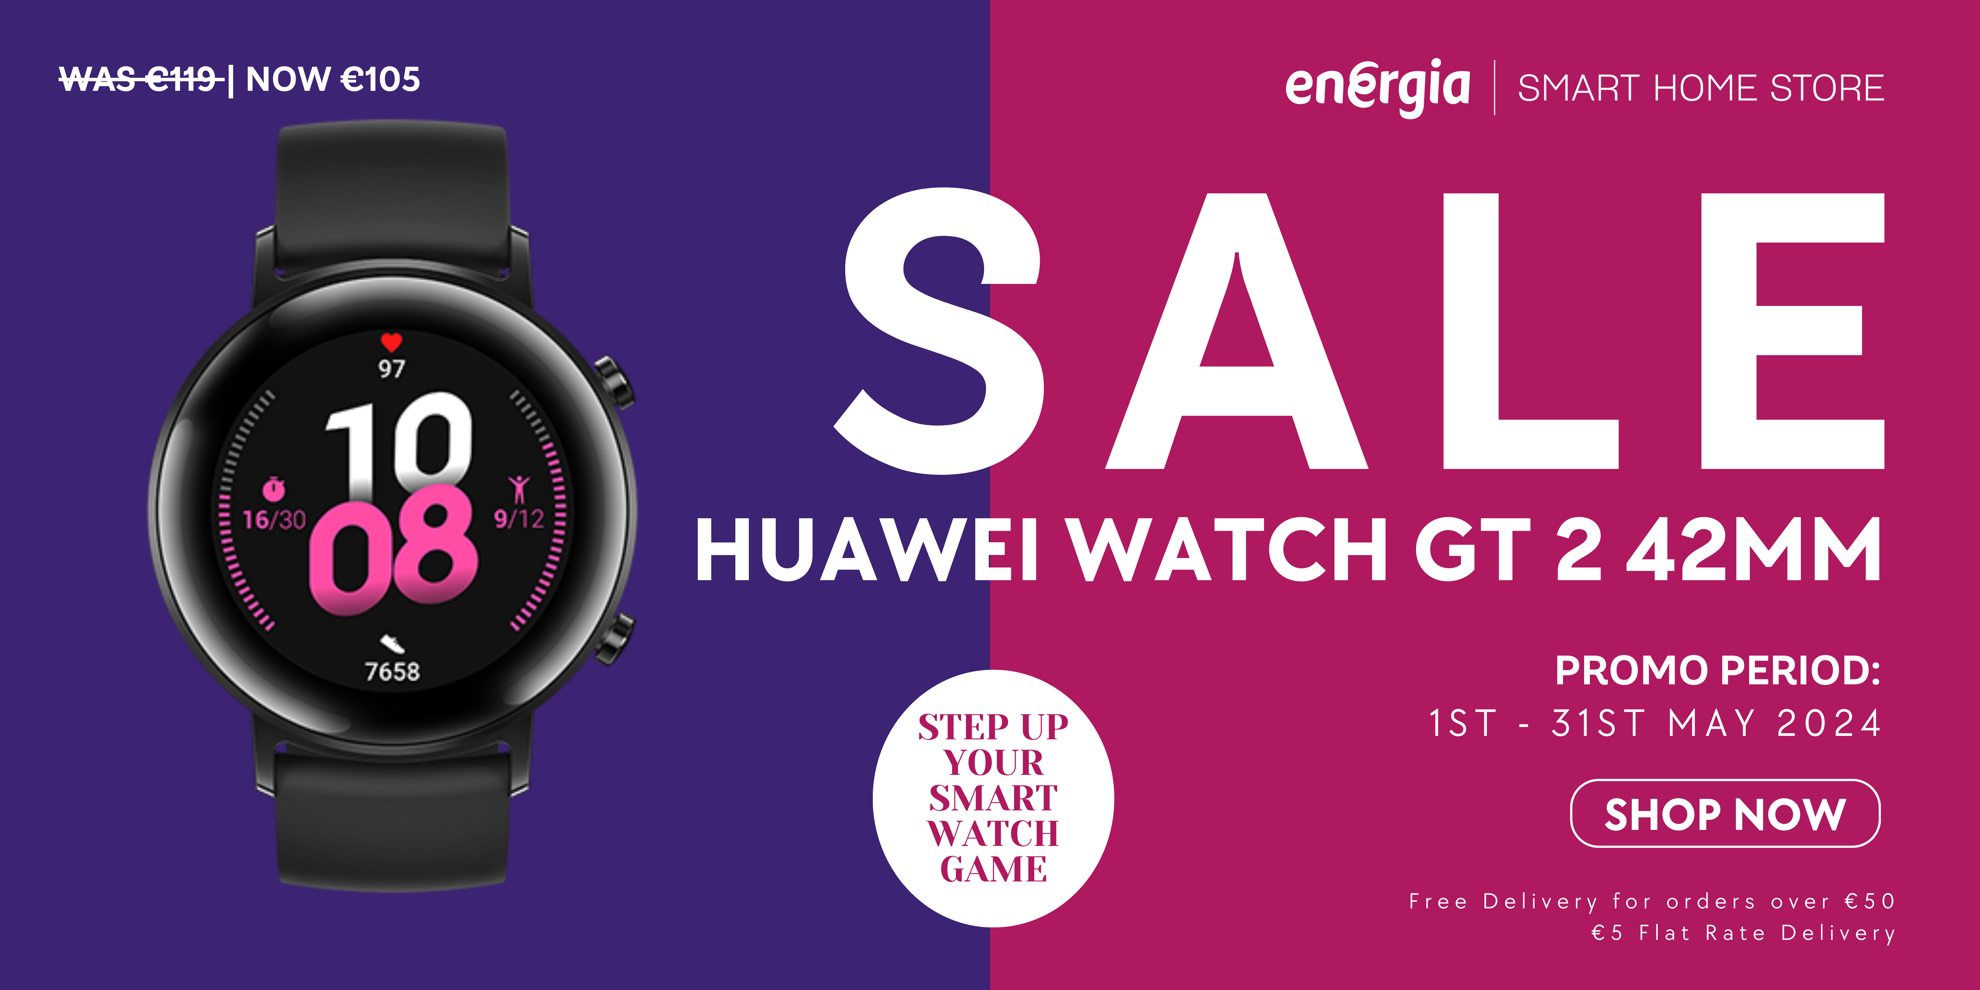 Product of the month for may is the Huawei GT2 42MM Diana Watch